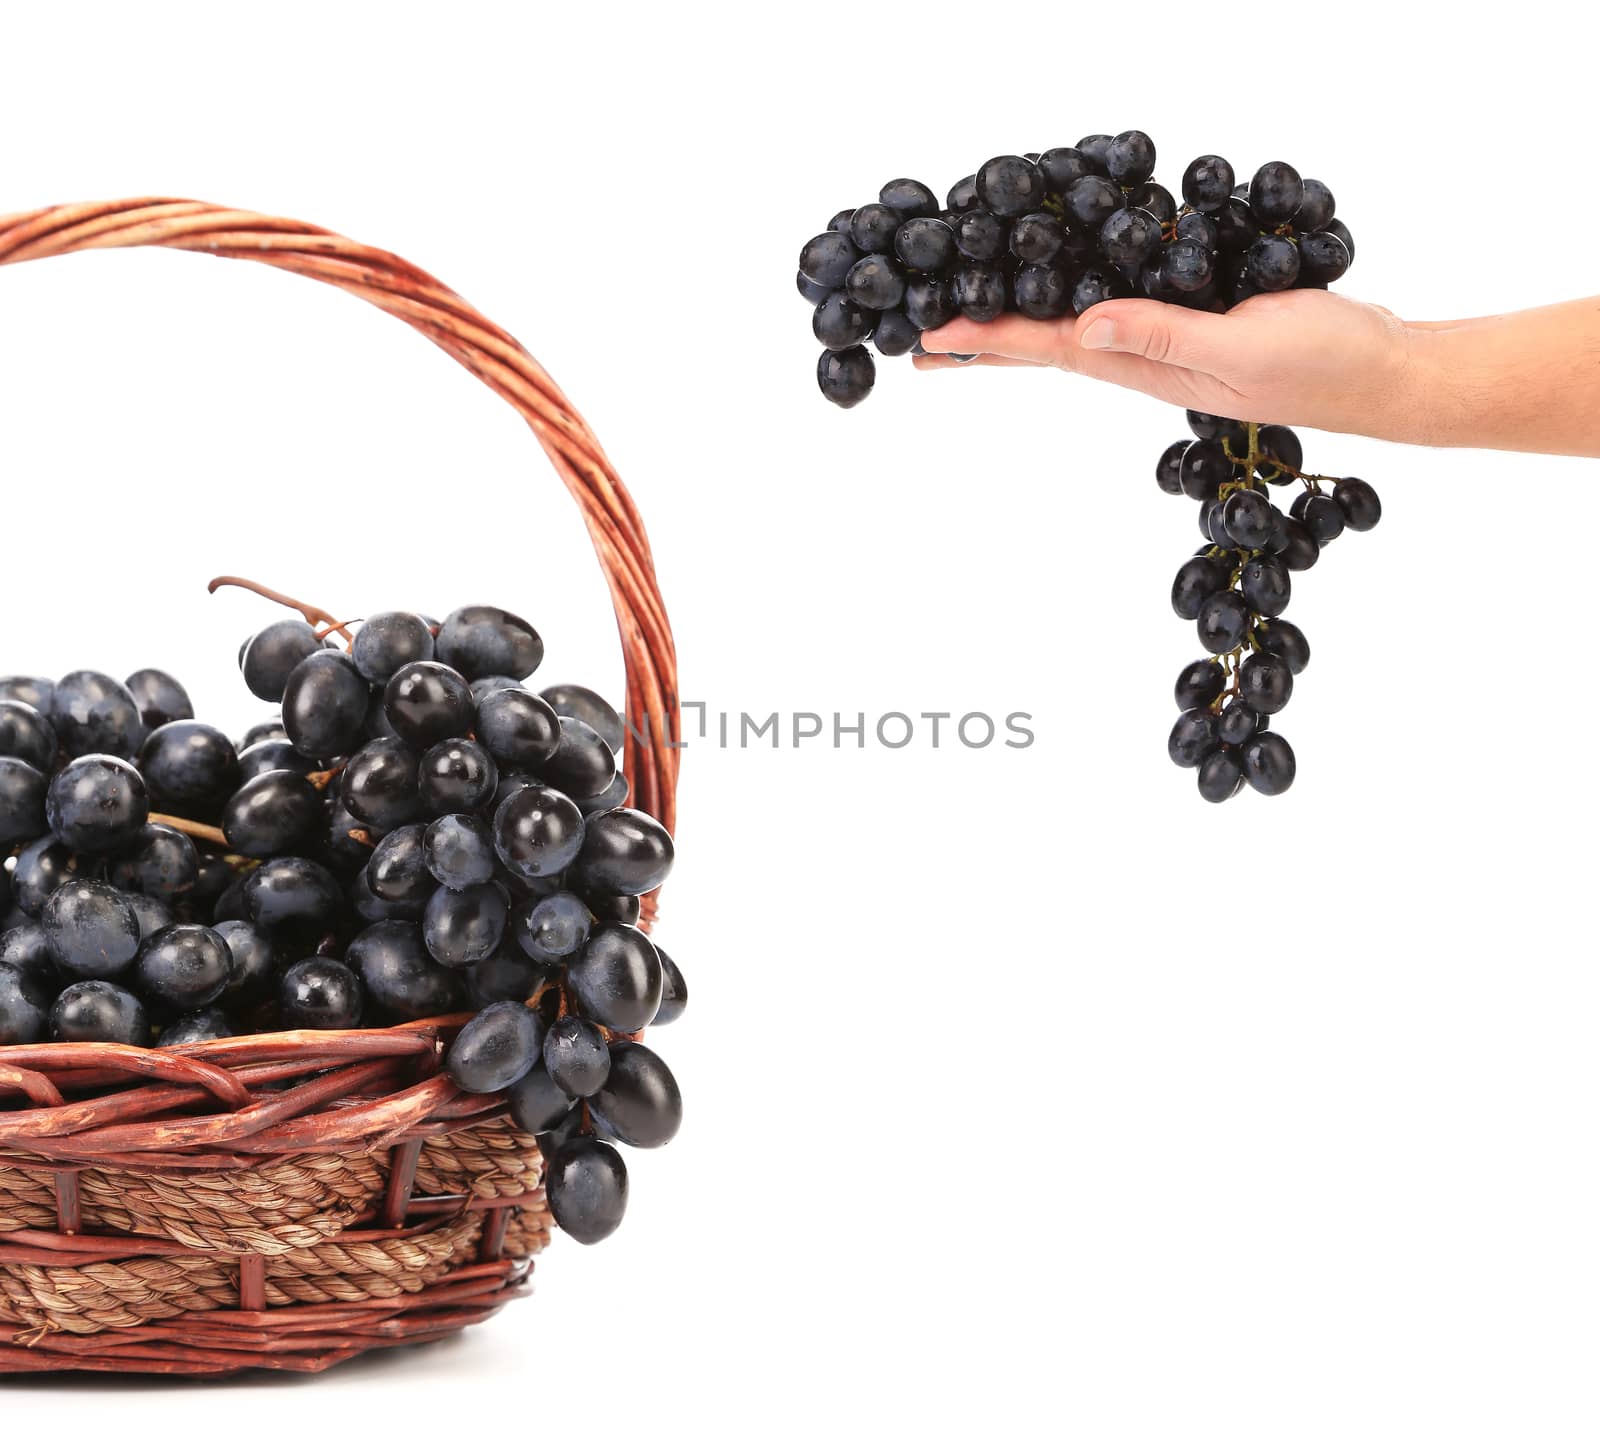 Dark grapes in a wicker basket. Whole background.